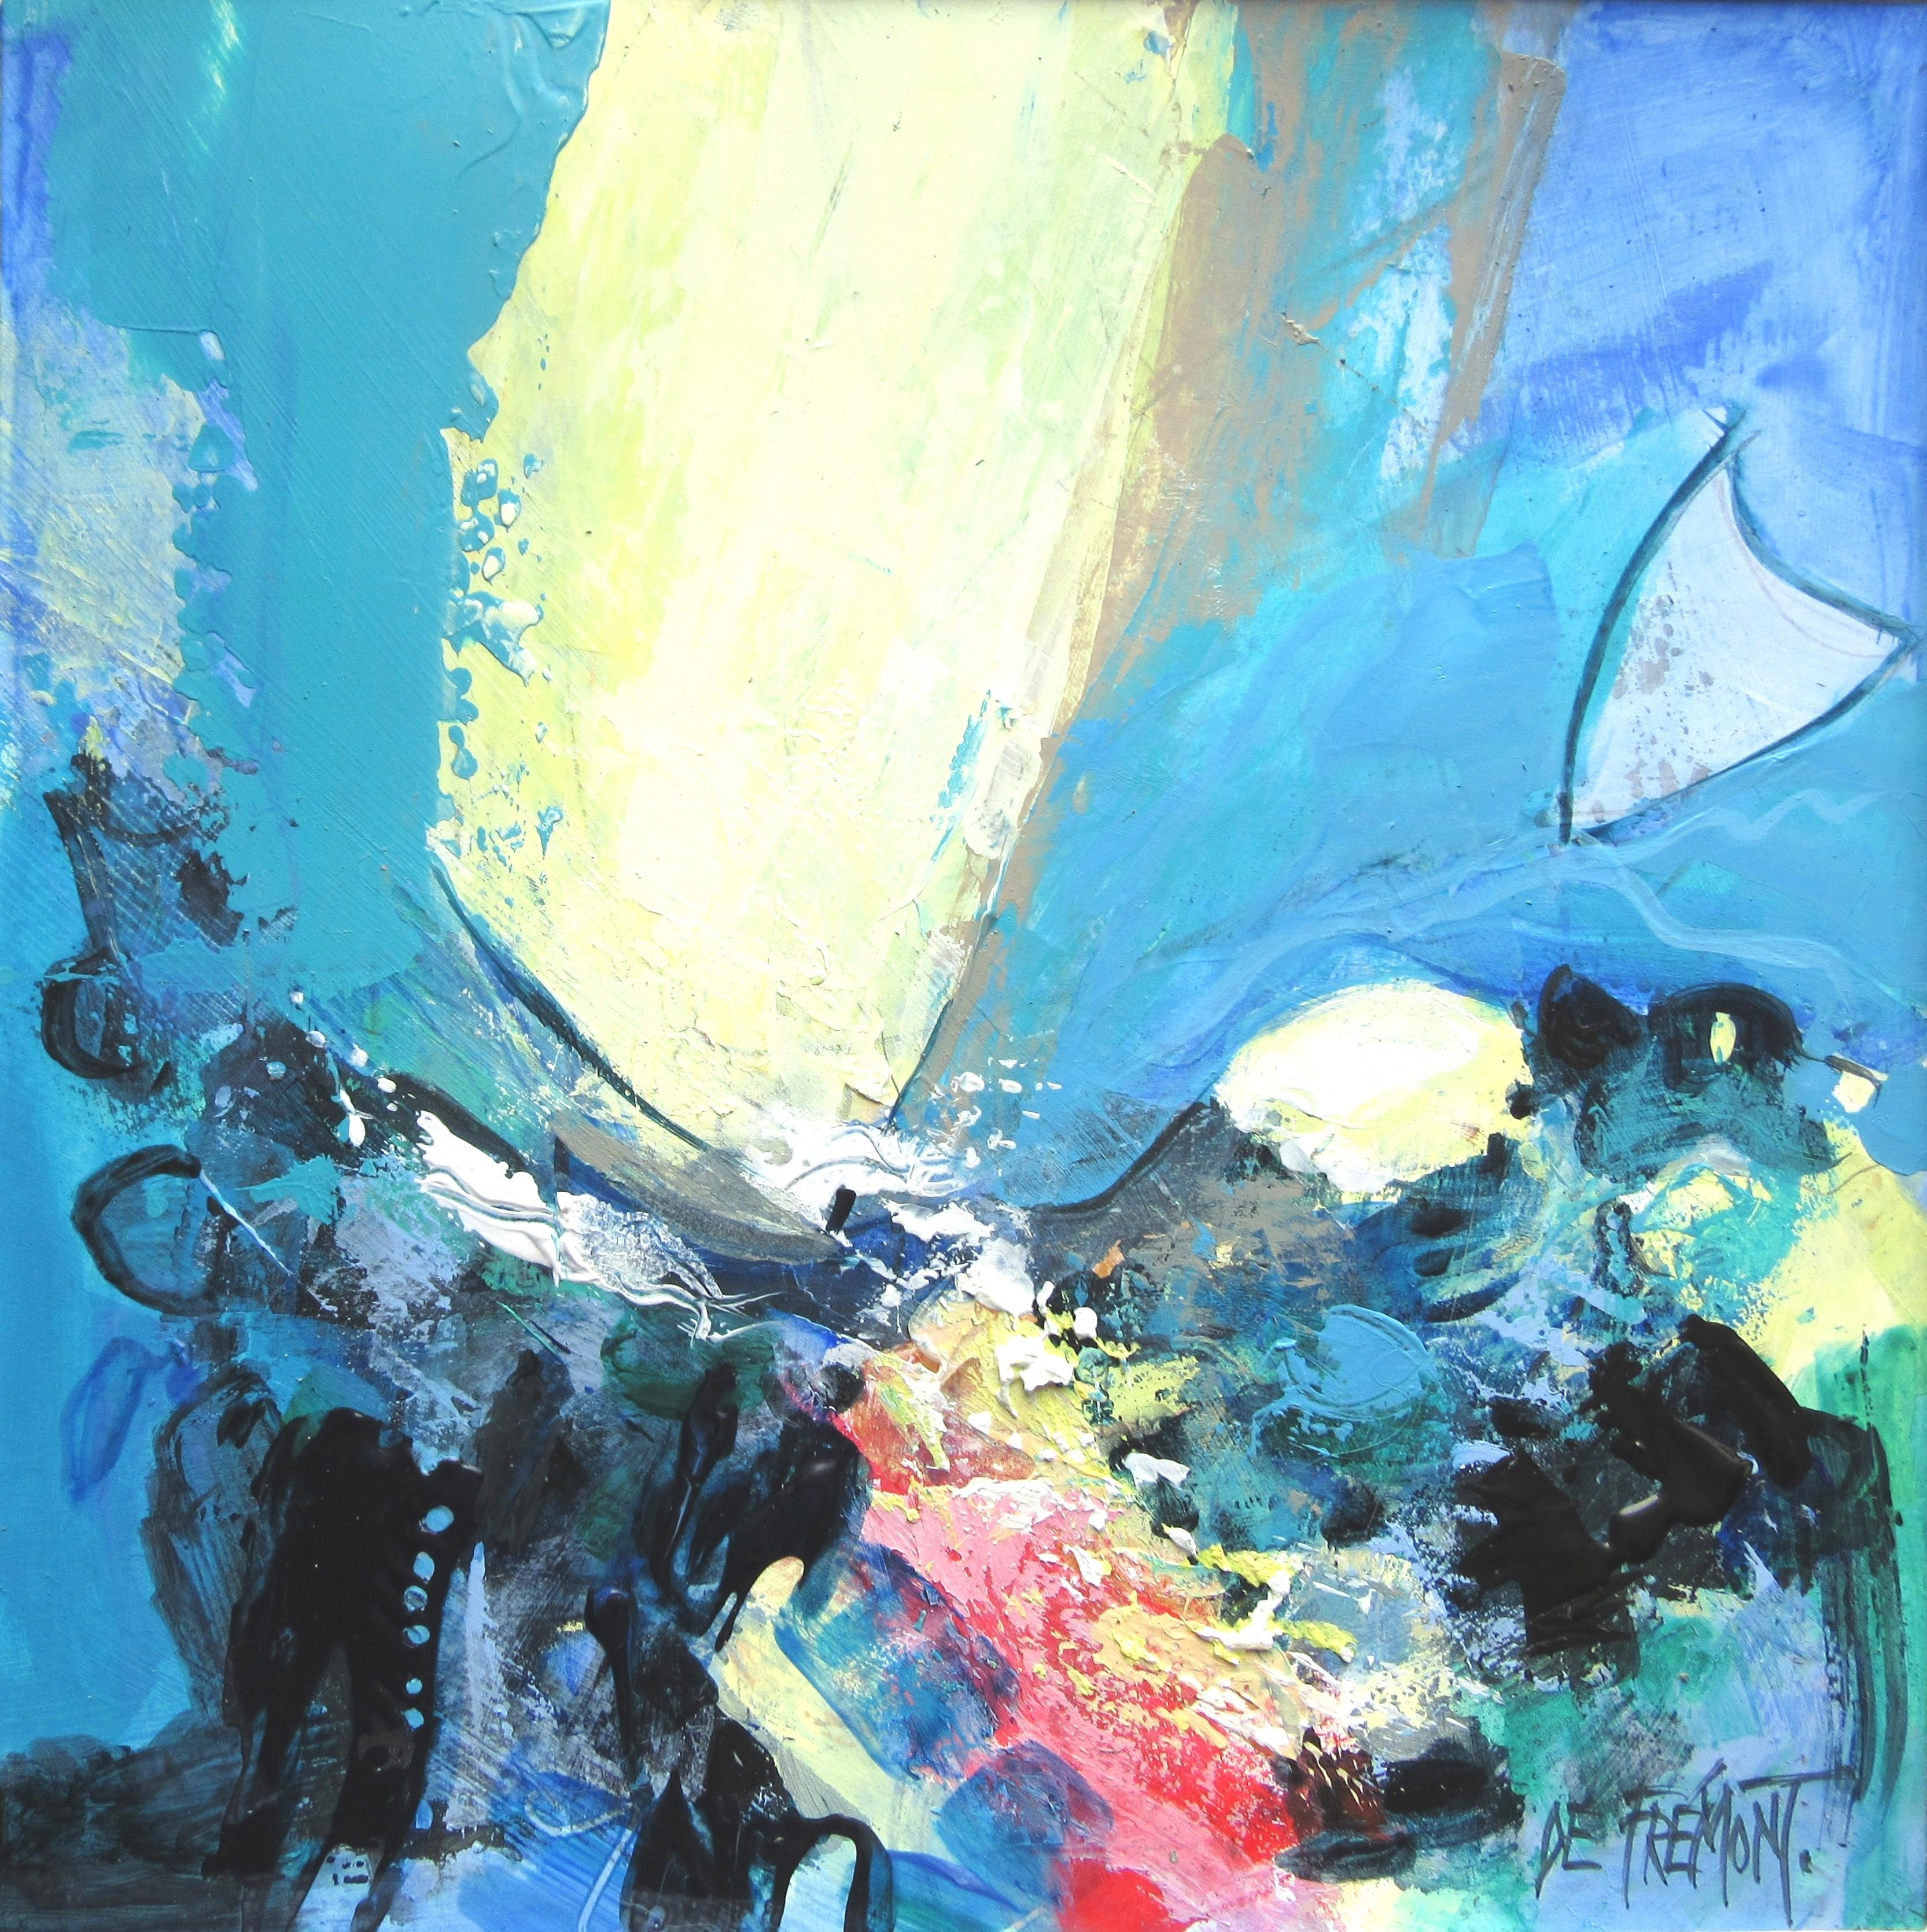 "Sun on the Sea", Large Colorful Squared Marine Landscape Mixed Media Painting